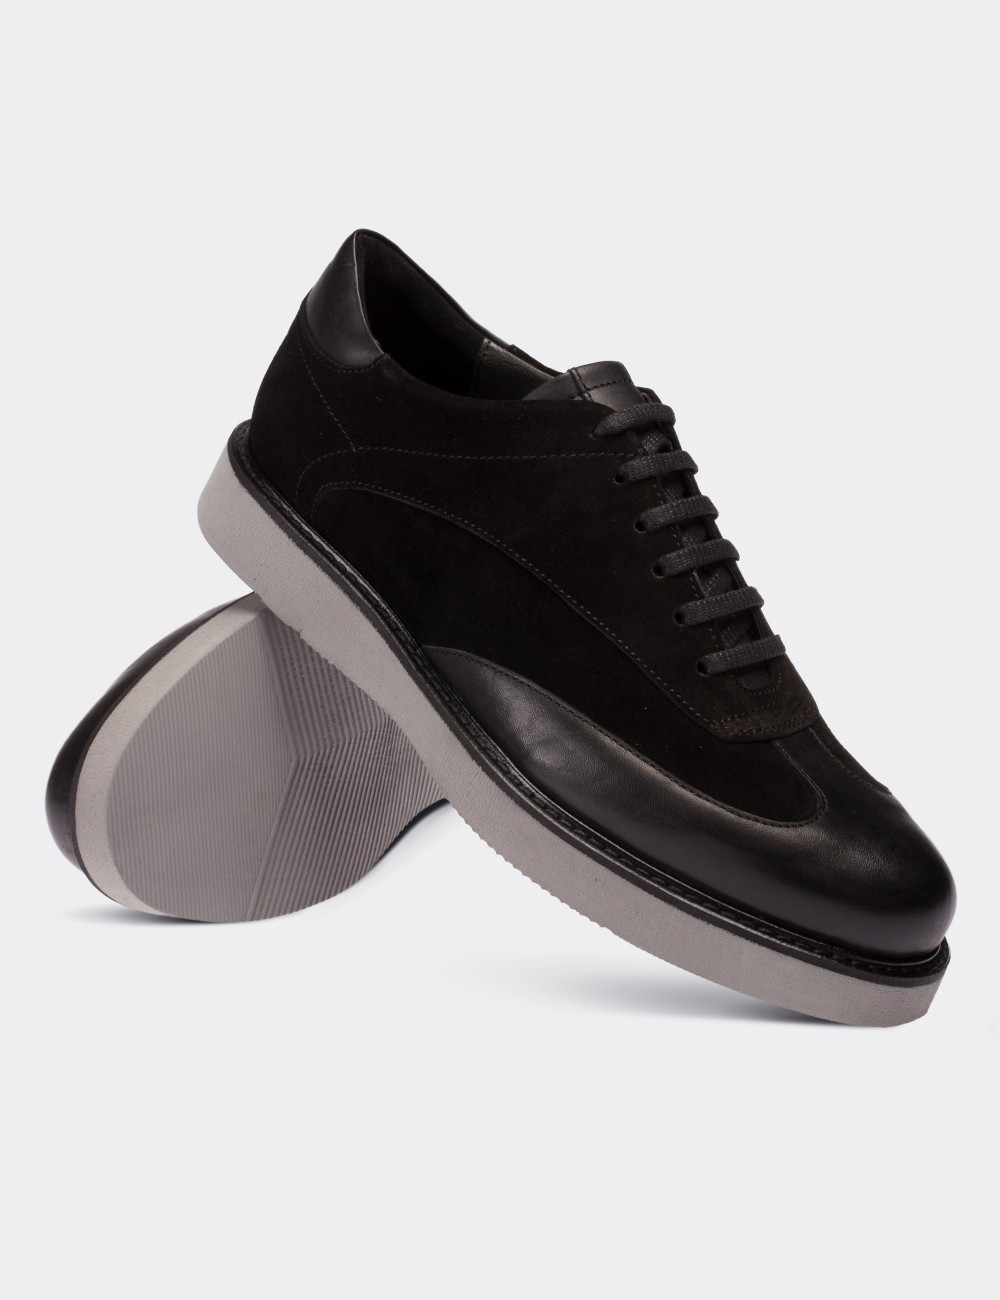 Black Suede Leather Lace-up Shoes - 01686MSYHE01